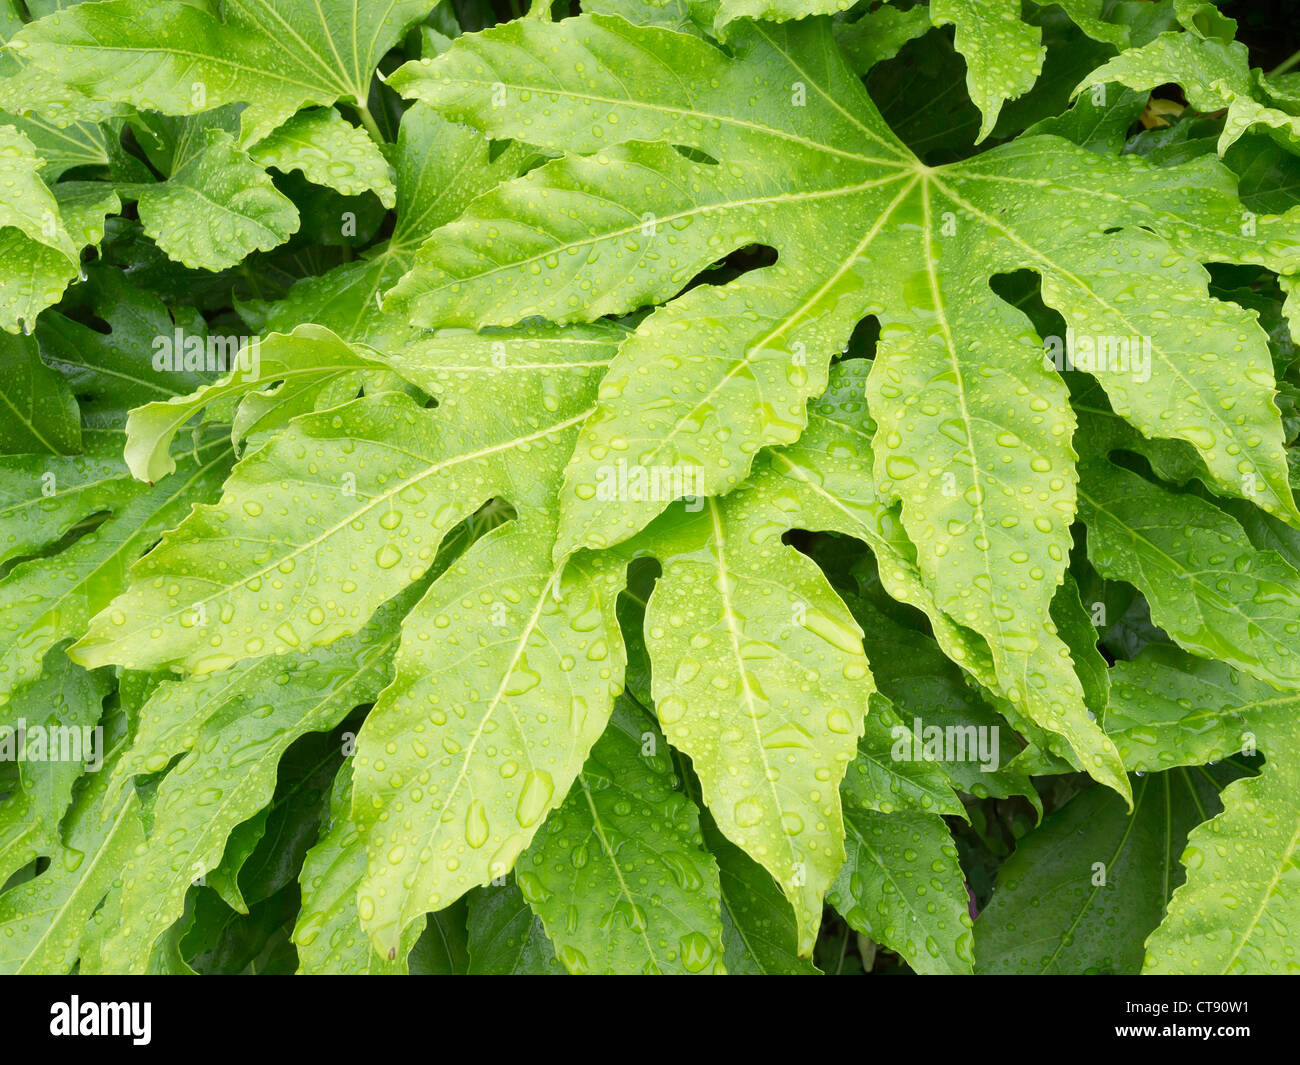 Fatsia japonica (Fatsi) or Japanese Aralia japonica healthy wet leaves detail England in wet spring summer 2012 Stock Photo